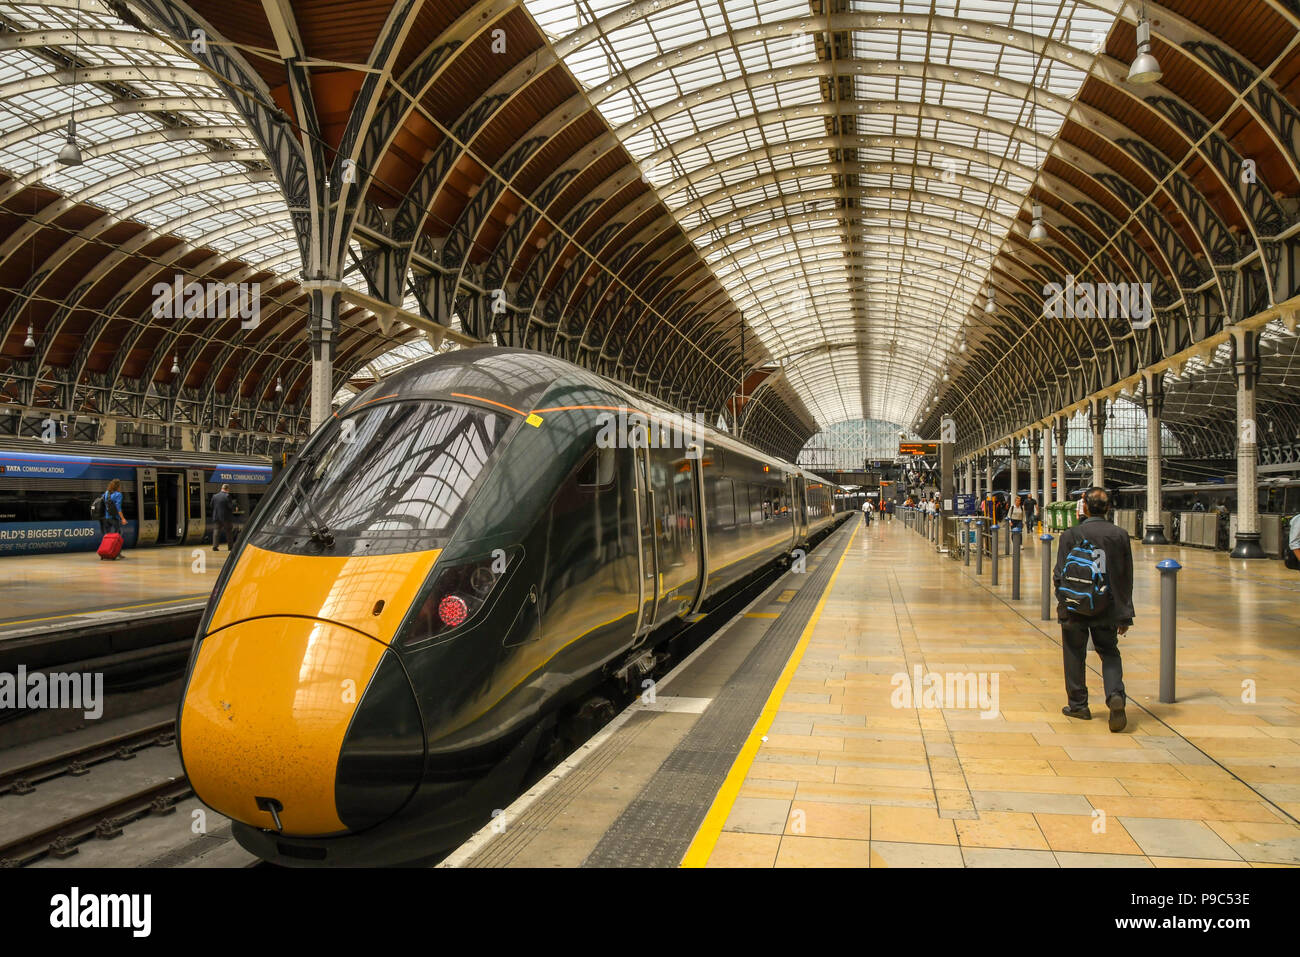 New Class 800 electro diesel train in London Paddington railway station with people on the platform. It is operated by Great Western Railway Stock Photo